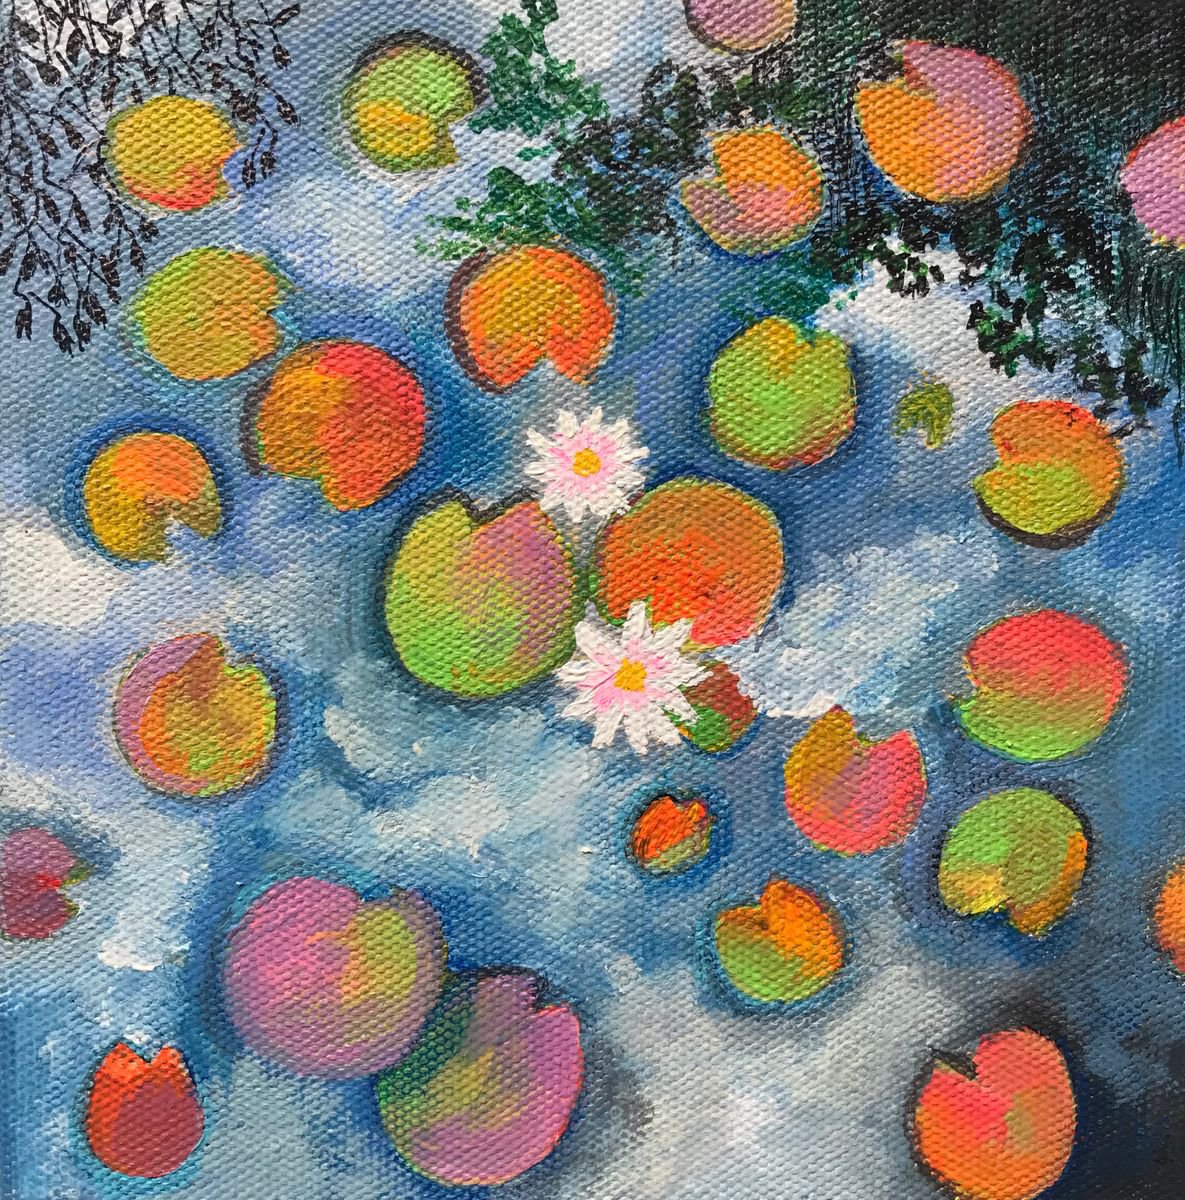 Sky reflections in waterlilies pond! Small Painting!! Ready to hang by Amita Dand